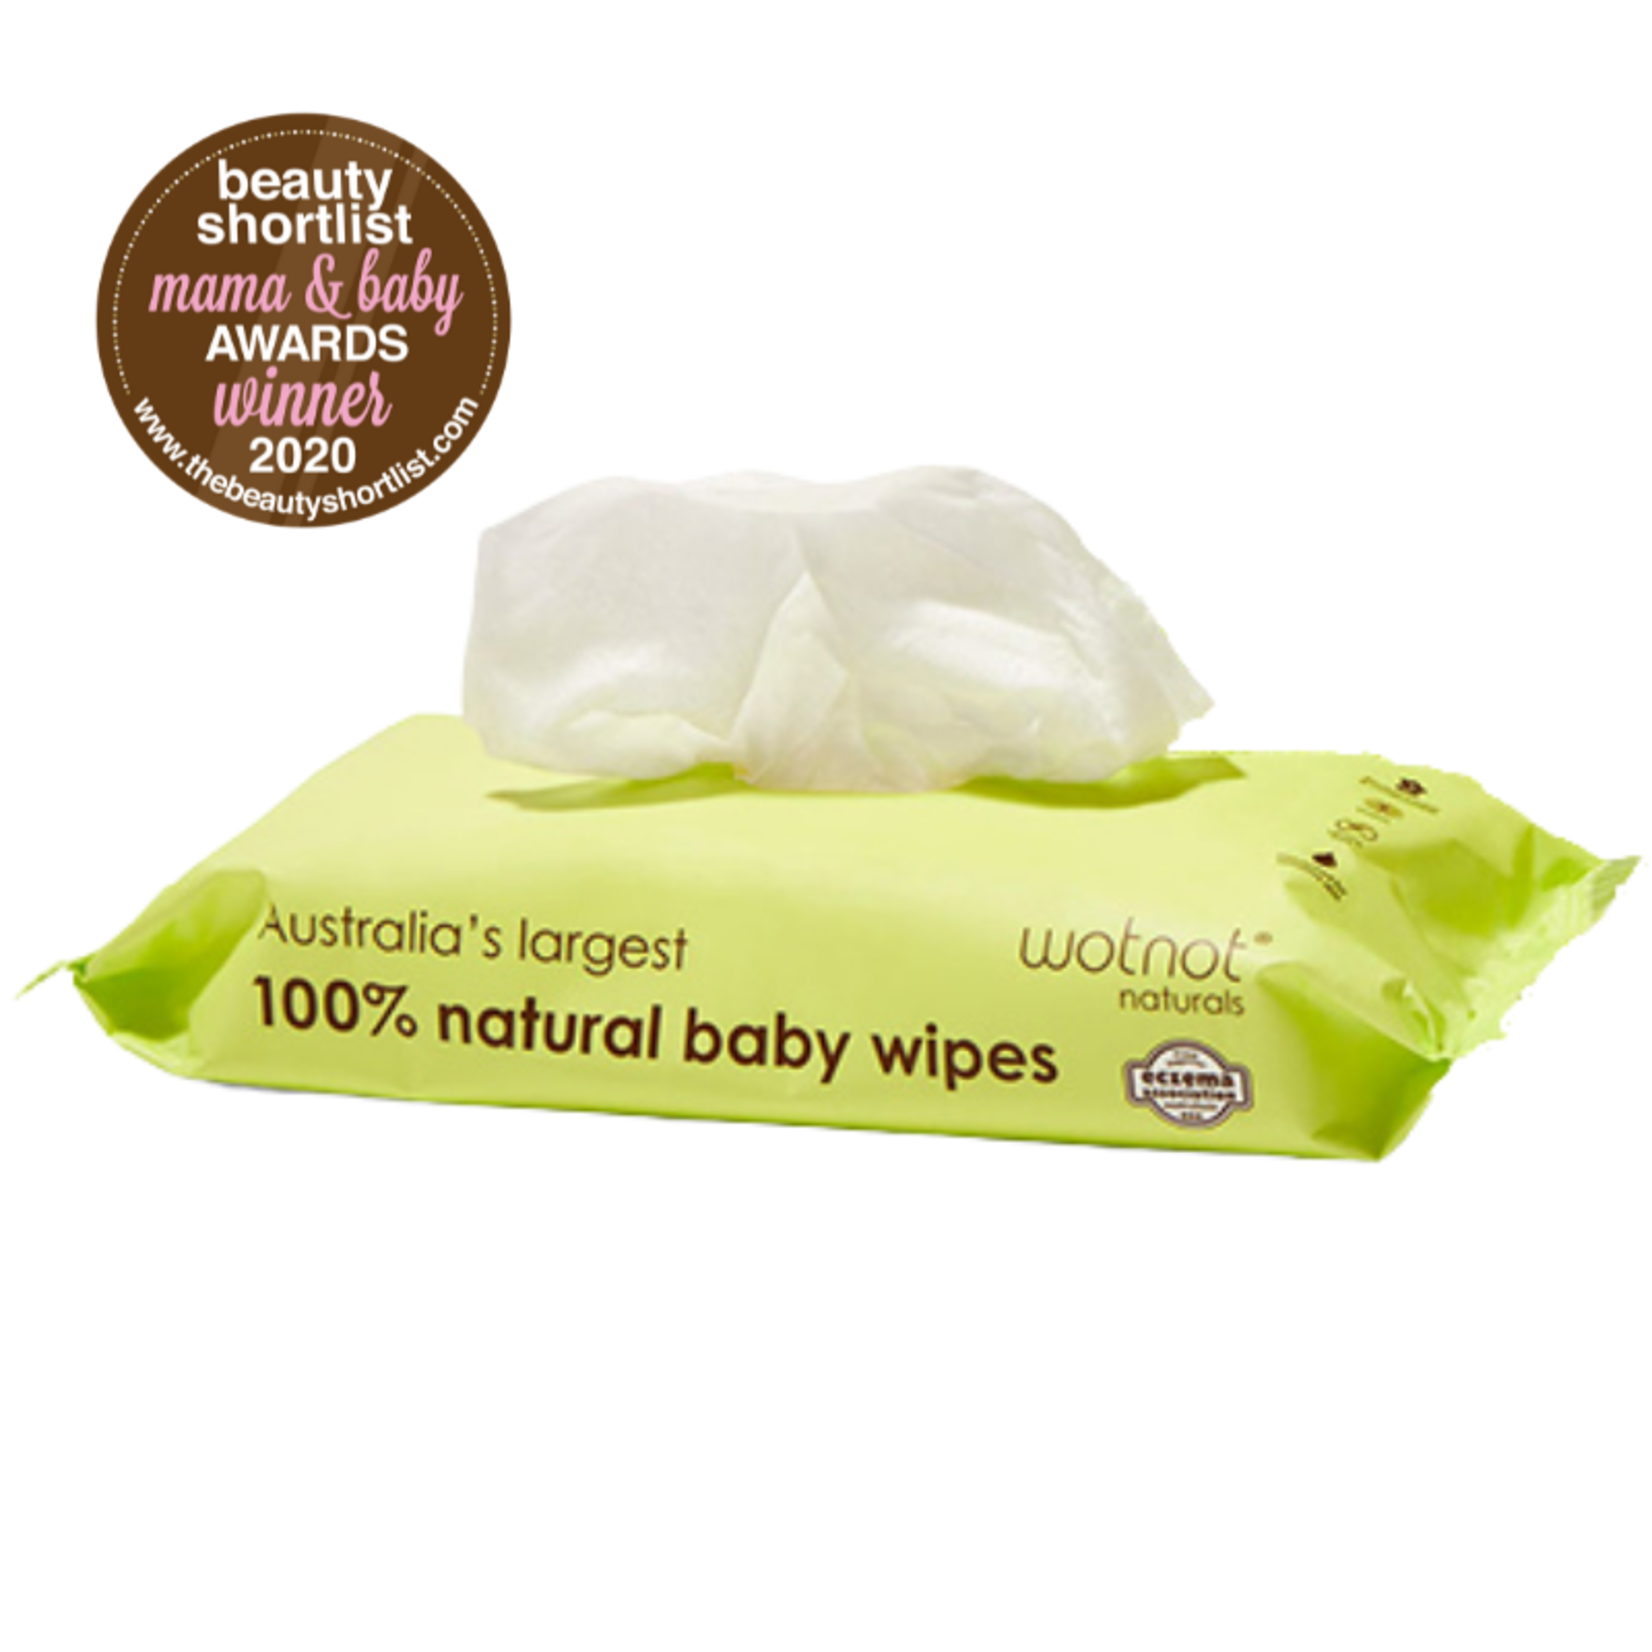 Wotnot Wotnot Biodegradable Baby Wipes